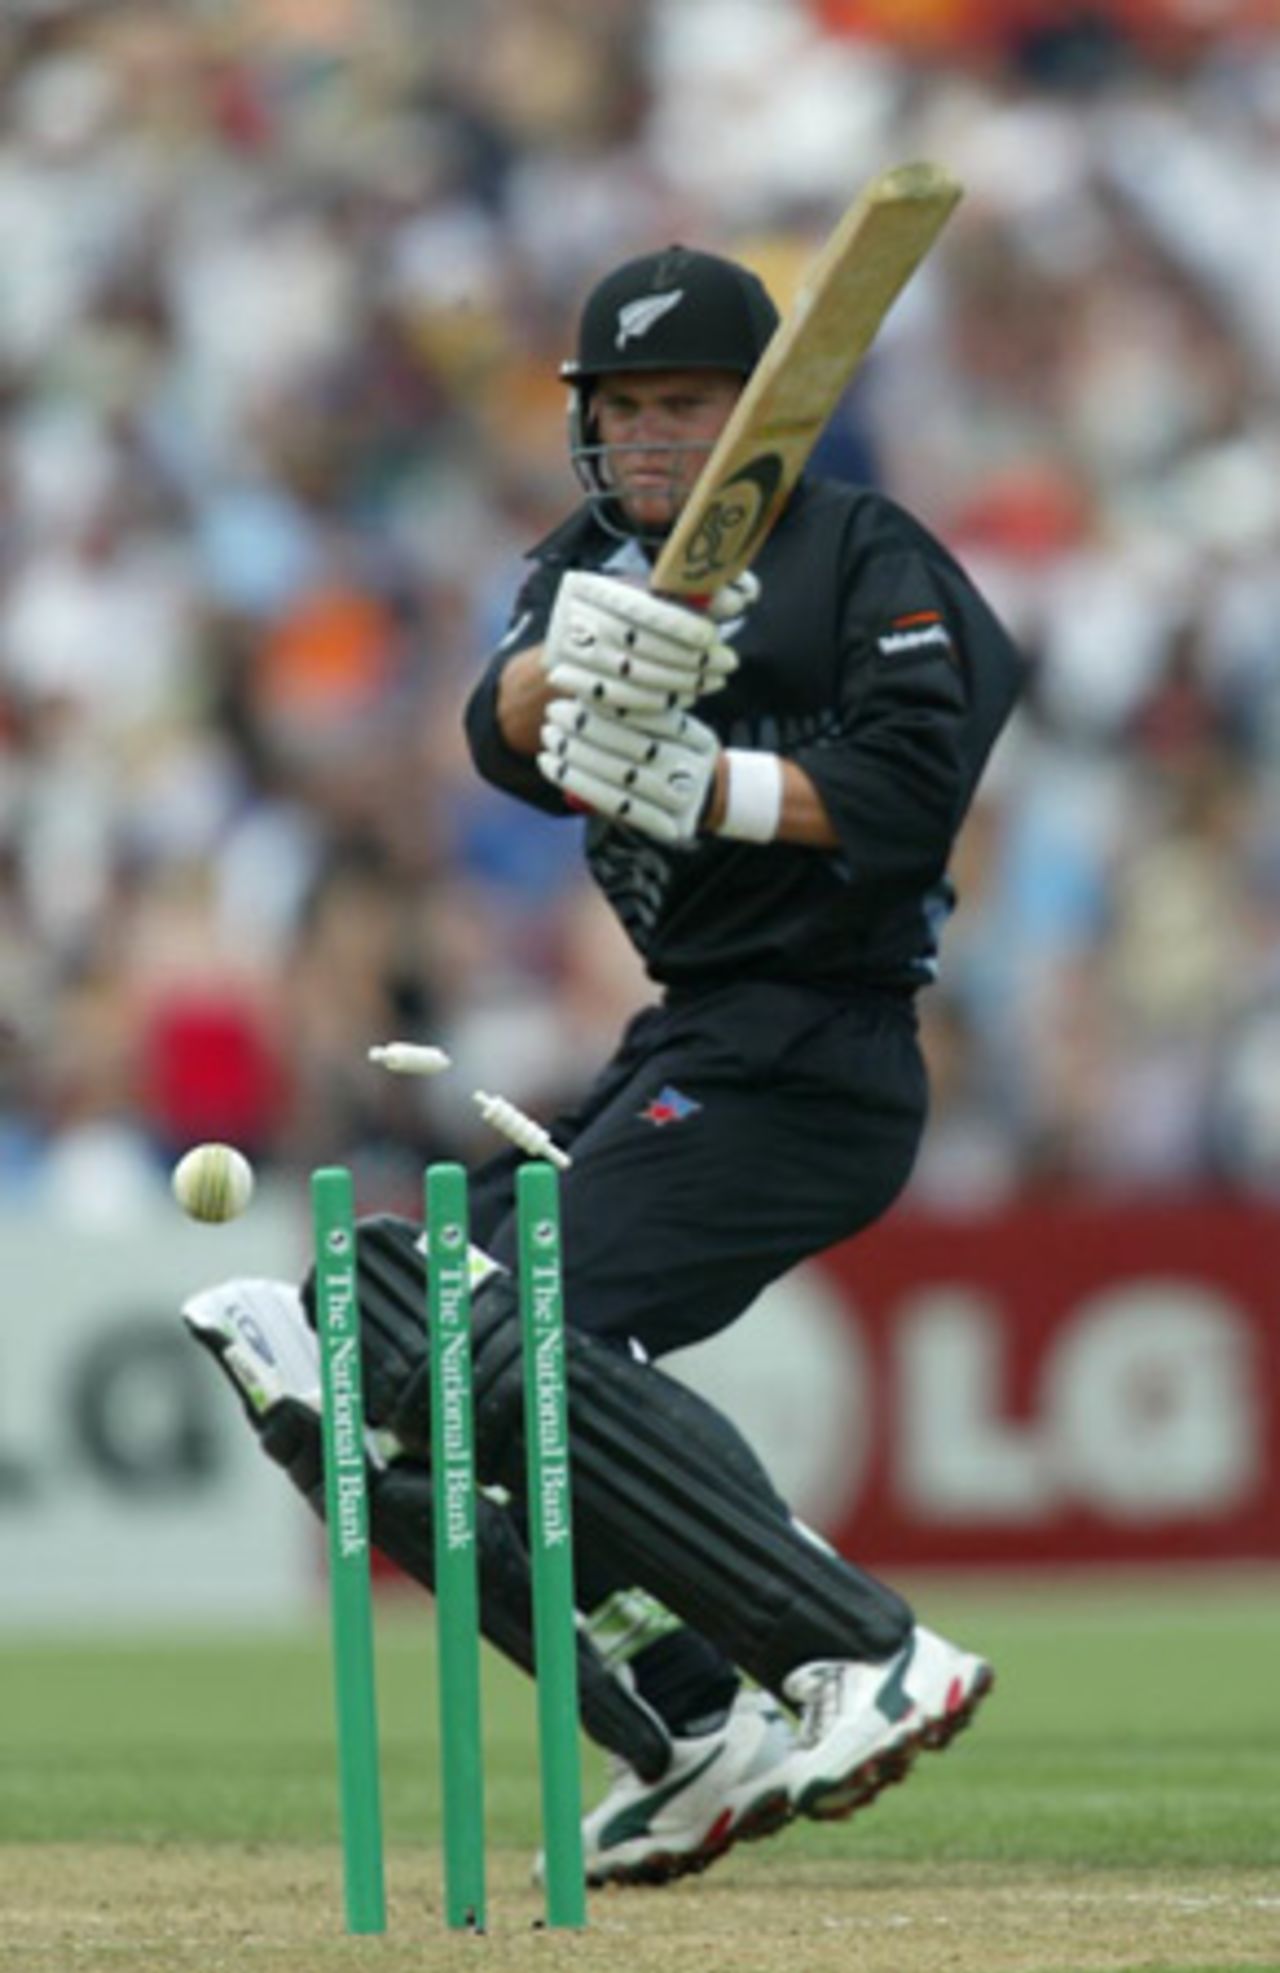 New Zealand batsman Lou Vincent plays a delivery on to his stumps to be bowled by Indian bowler Javagal Srinath for 34. 2nd ODI: New Zealand v India at McLean Park, Napier, 29 December 2002.